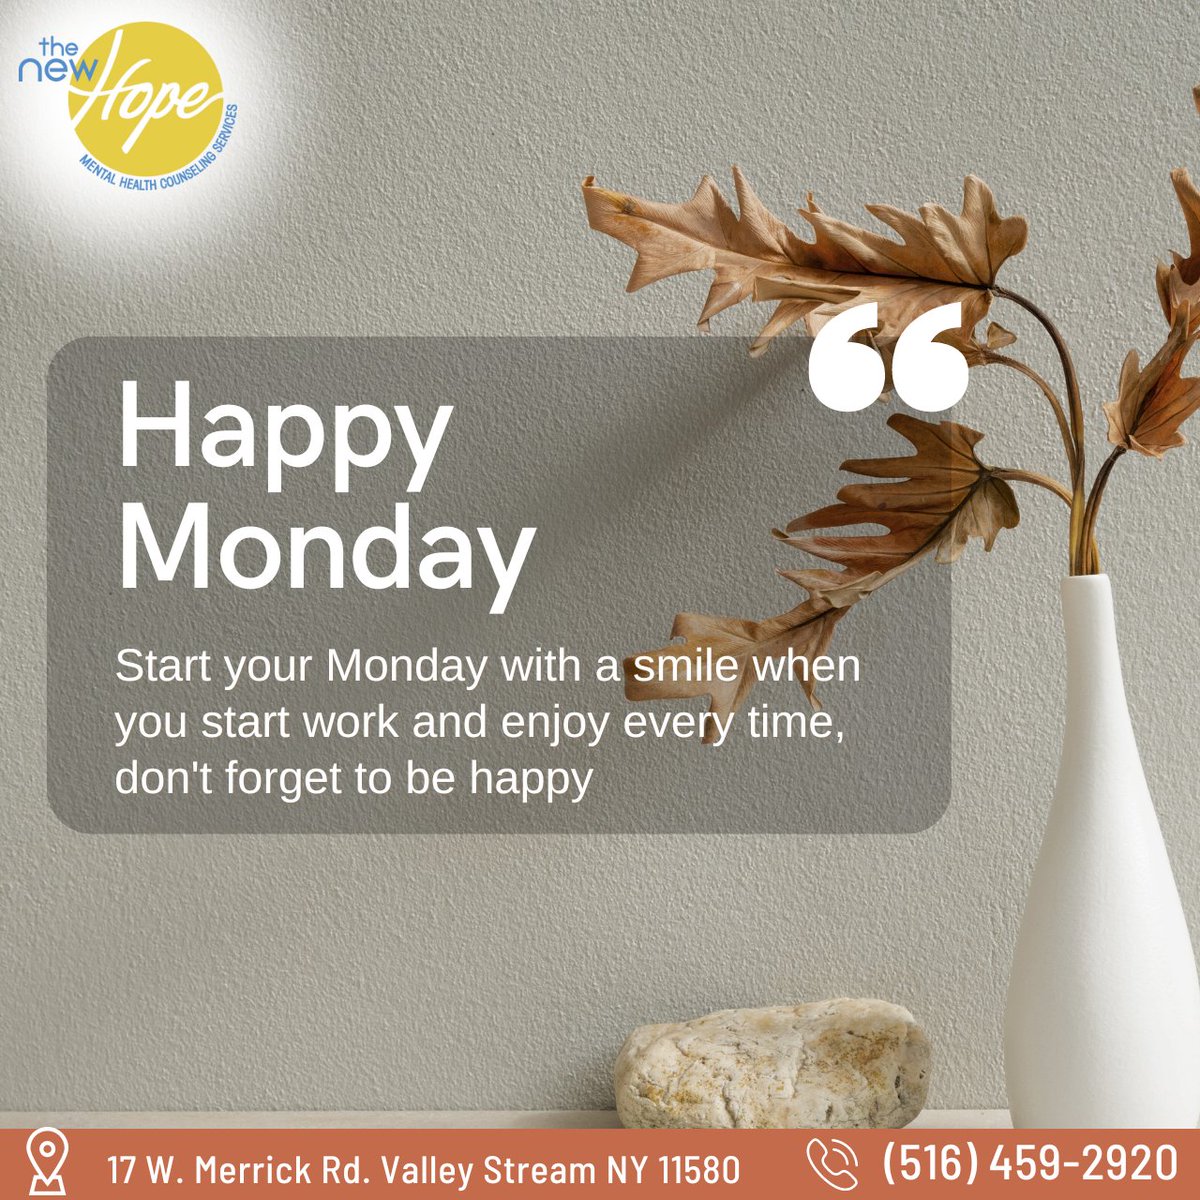 Happy Monday! Start your week with a smile and embrace every moment at work with joy. 

#MondayMotivation #mondayquotes #mondayquotespiration  #inspirationquotes #motivationalquotesforlife #mentalhealthtips   #mentalhealthcounseling #mentalhealthcounselor  #Thenewhopemhcs